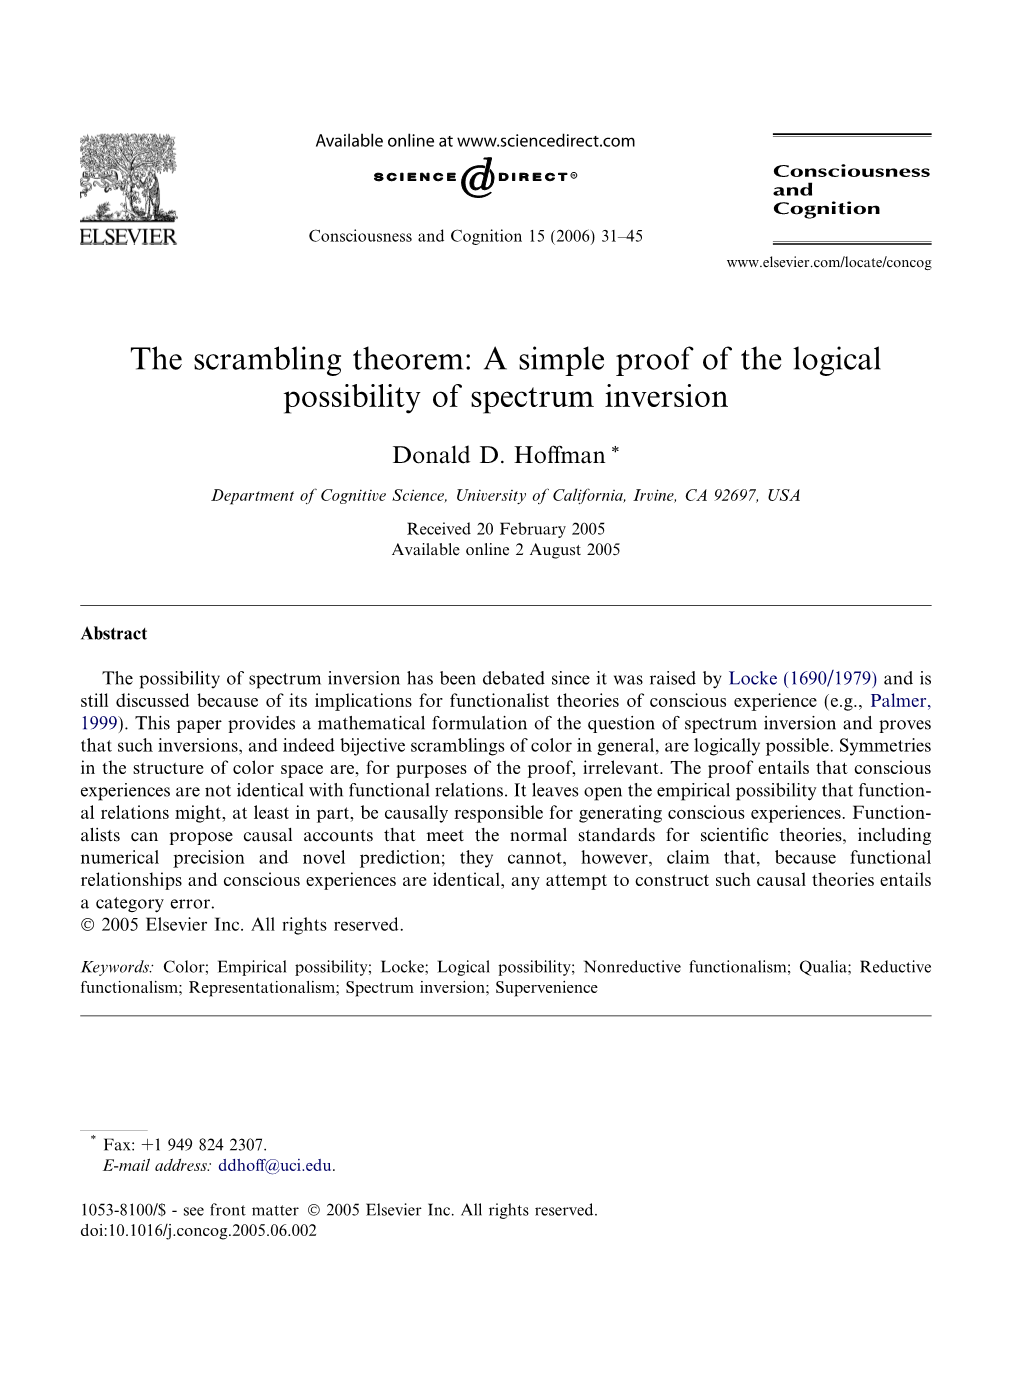 The Scrambling Theorem: a Simple Proof of the Logical Possibility of Spectrum Inversion